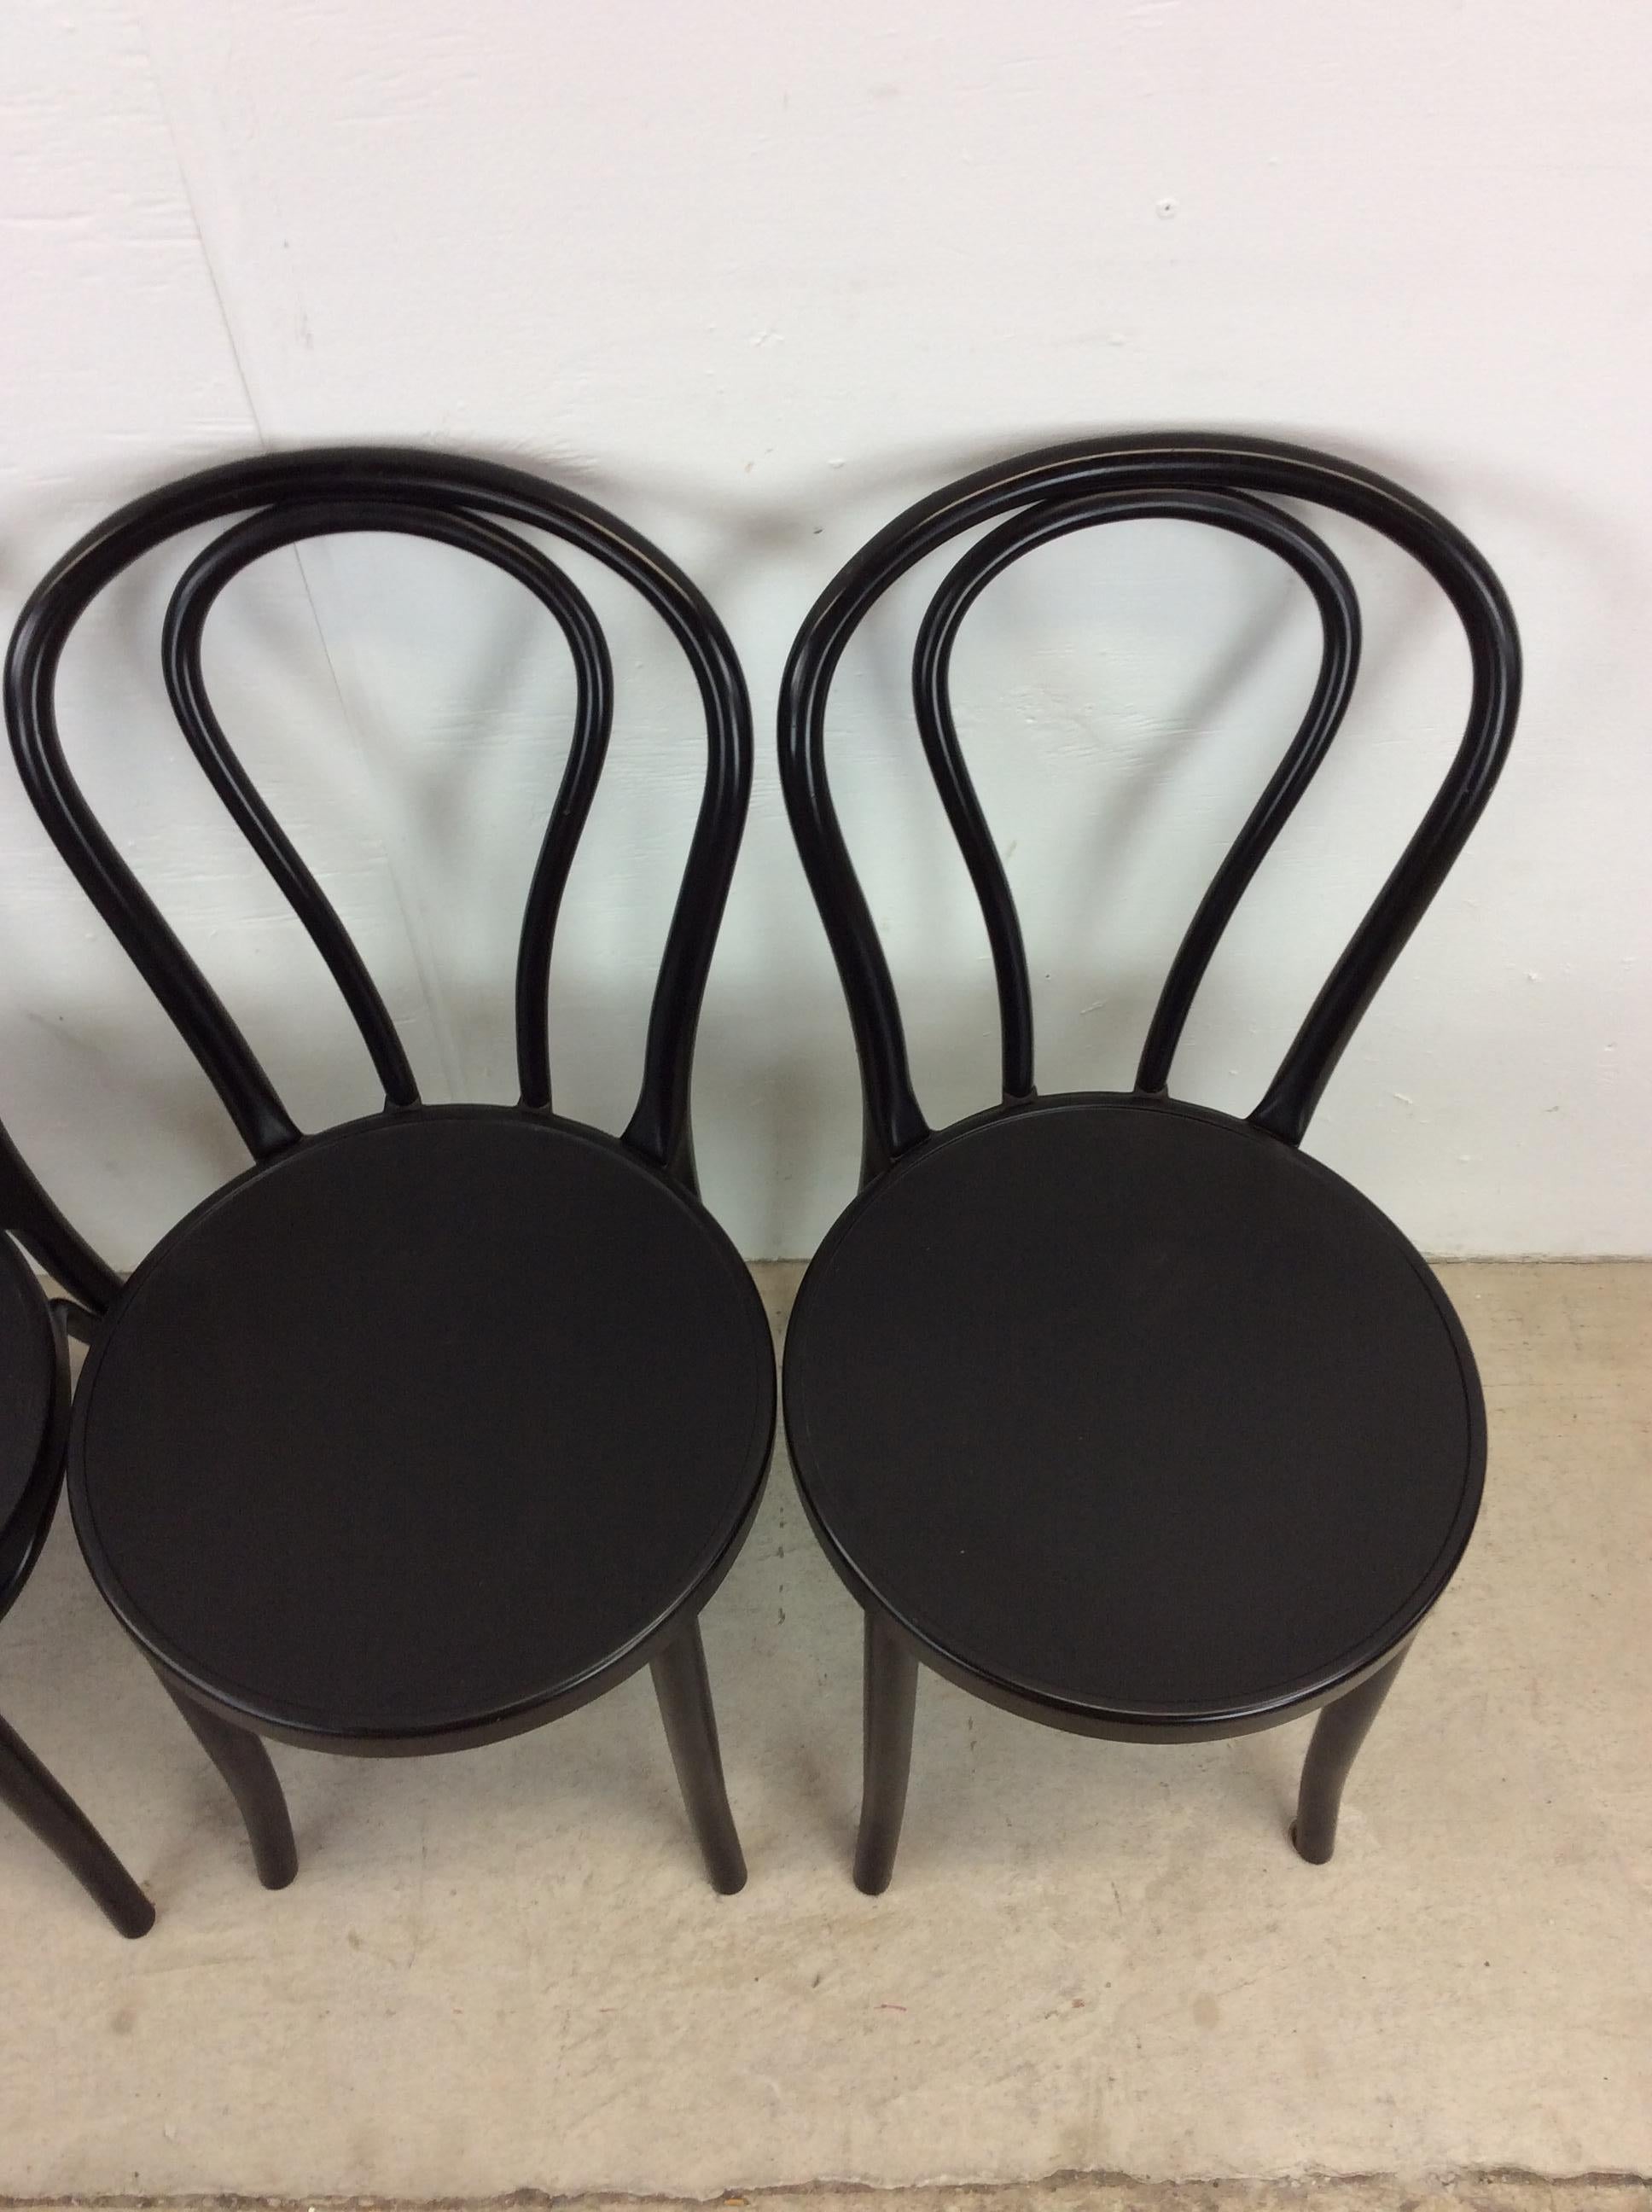 French Provincial Set of 4 Vintage IKEA Black Cafe Style Chairs For Sale